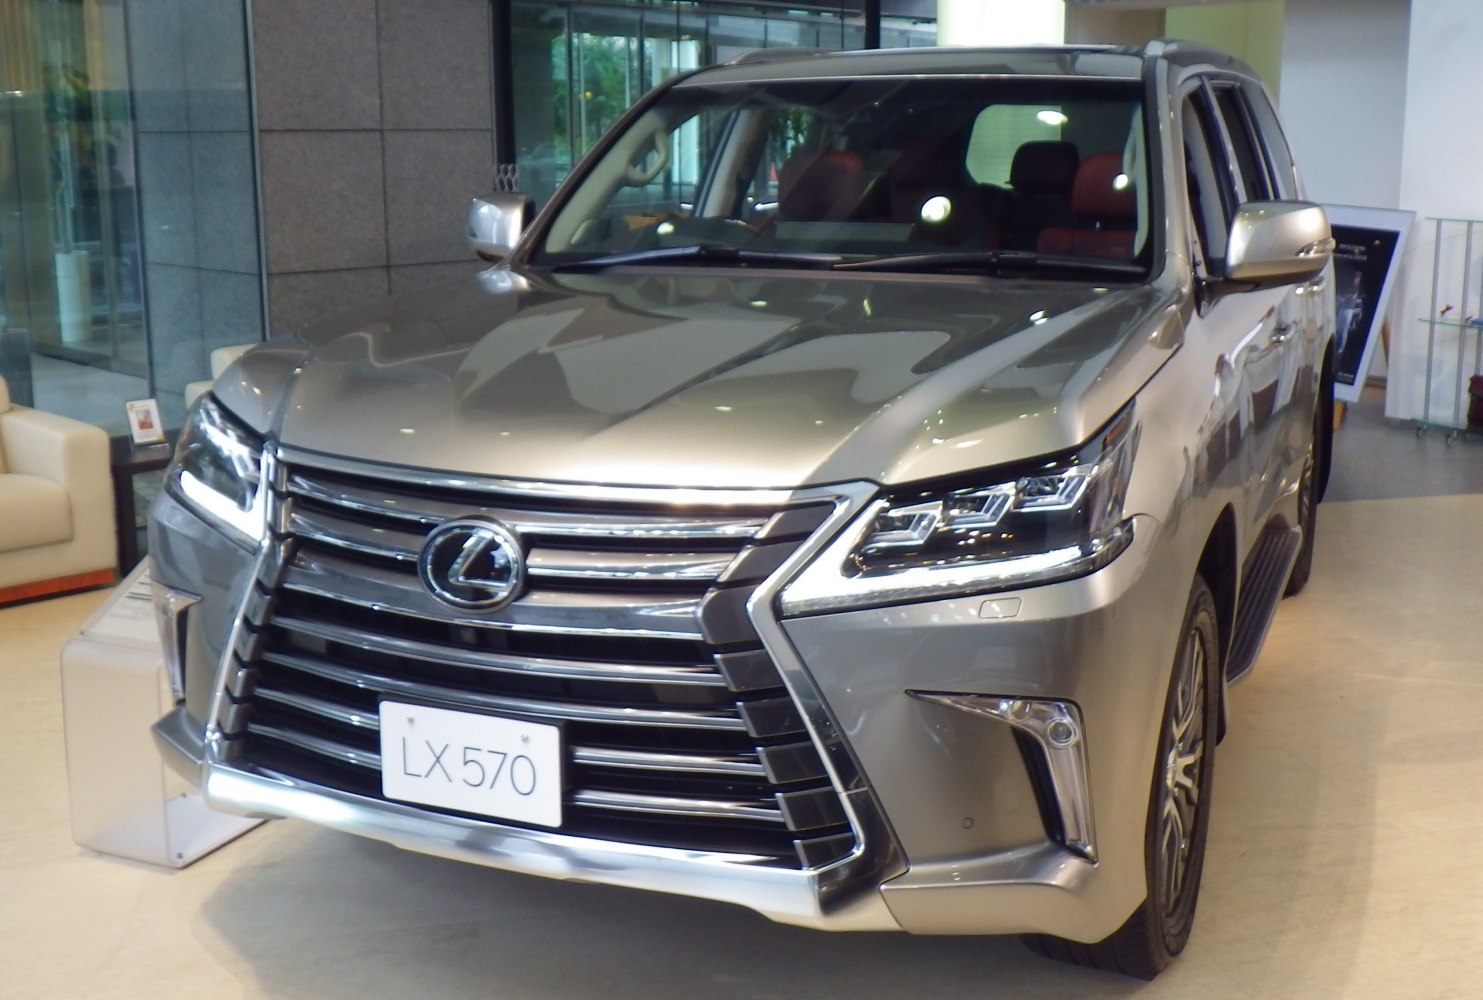 https://totalrenting.es/wp-content/uploads/2022/10/lexus-lx-iii-facelift-2015-2016-450d-v8-272-cv-awd-automatic-suv.png